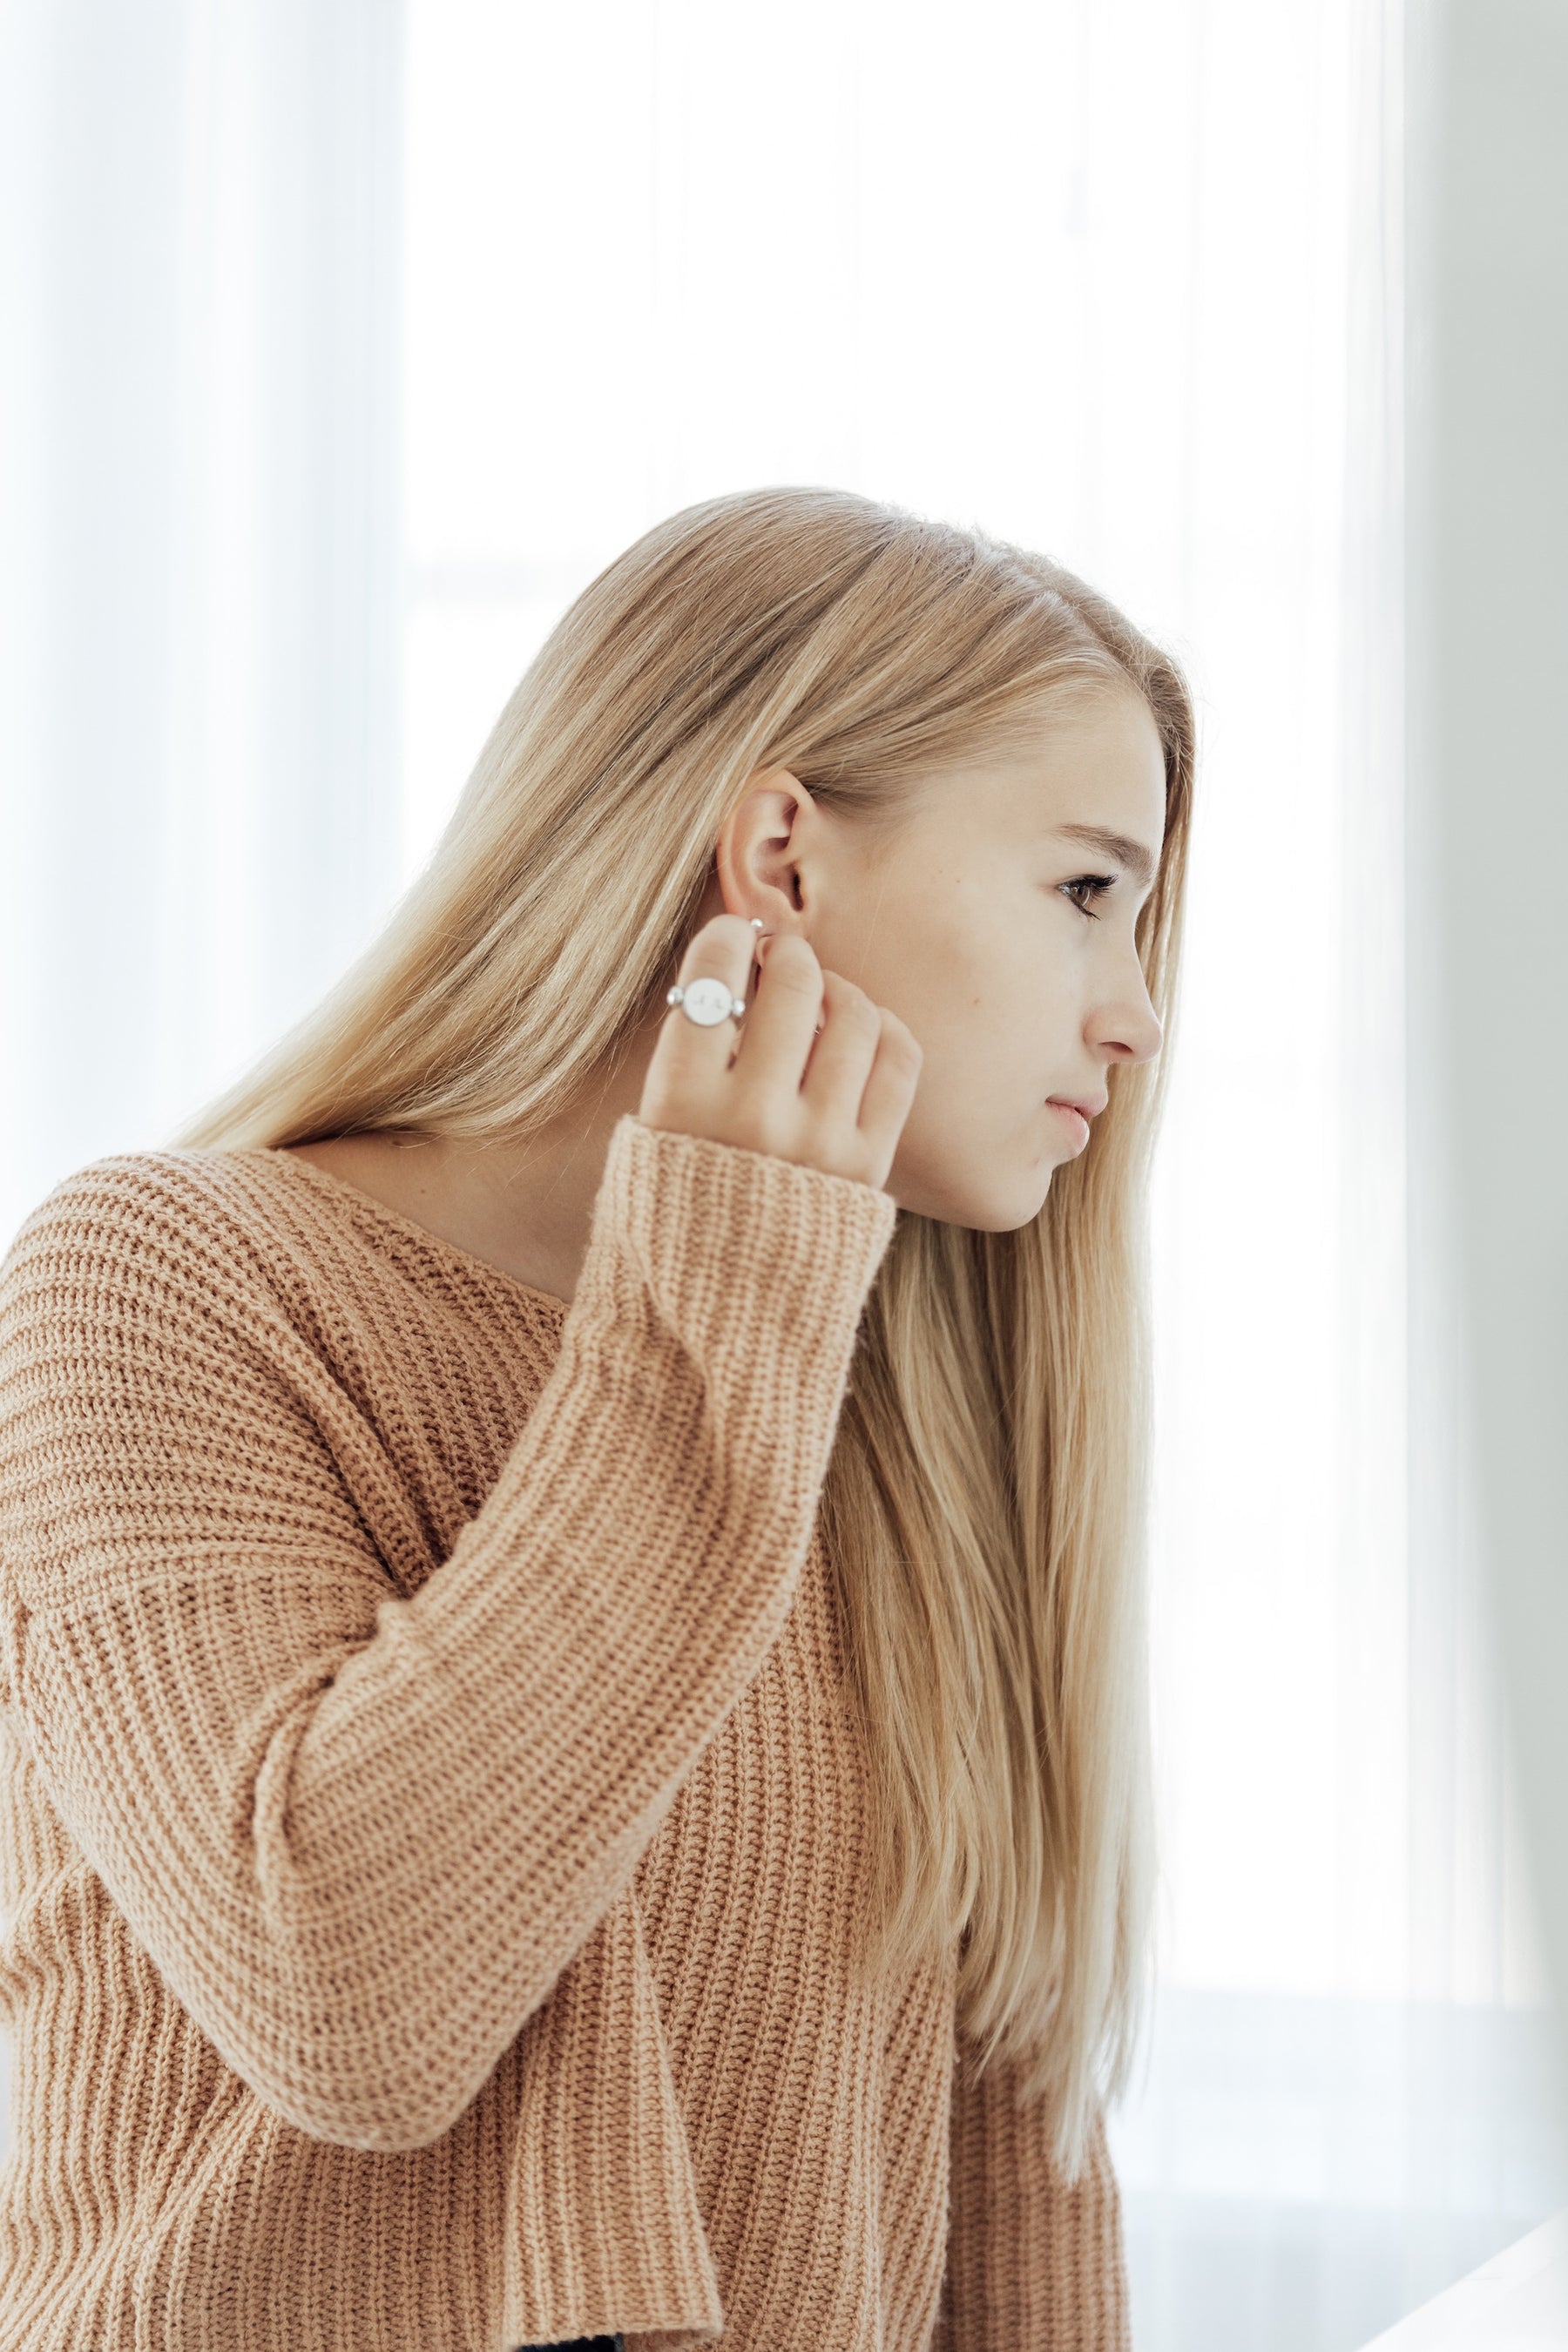 blond young woman adjusting earring while standing in front of a mirror, wearing a tan sweater and a silver conquering